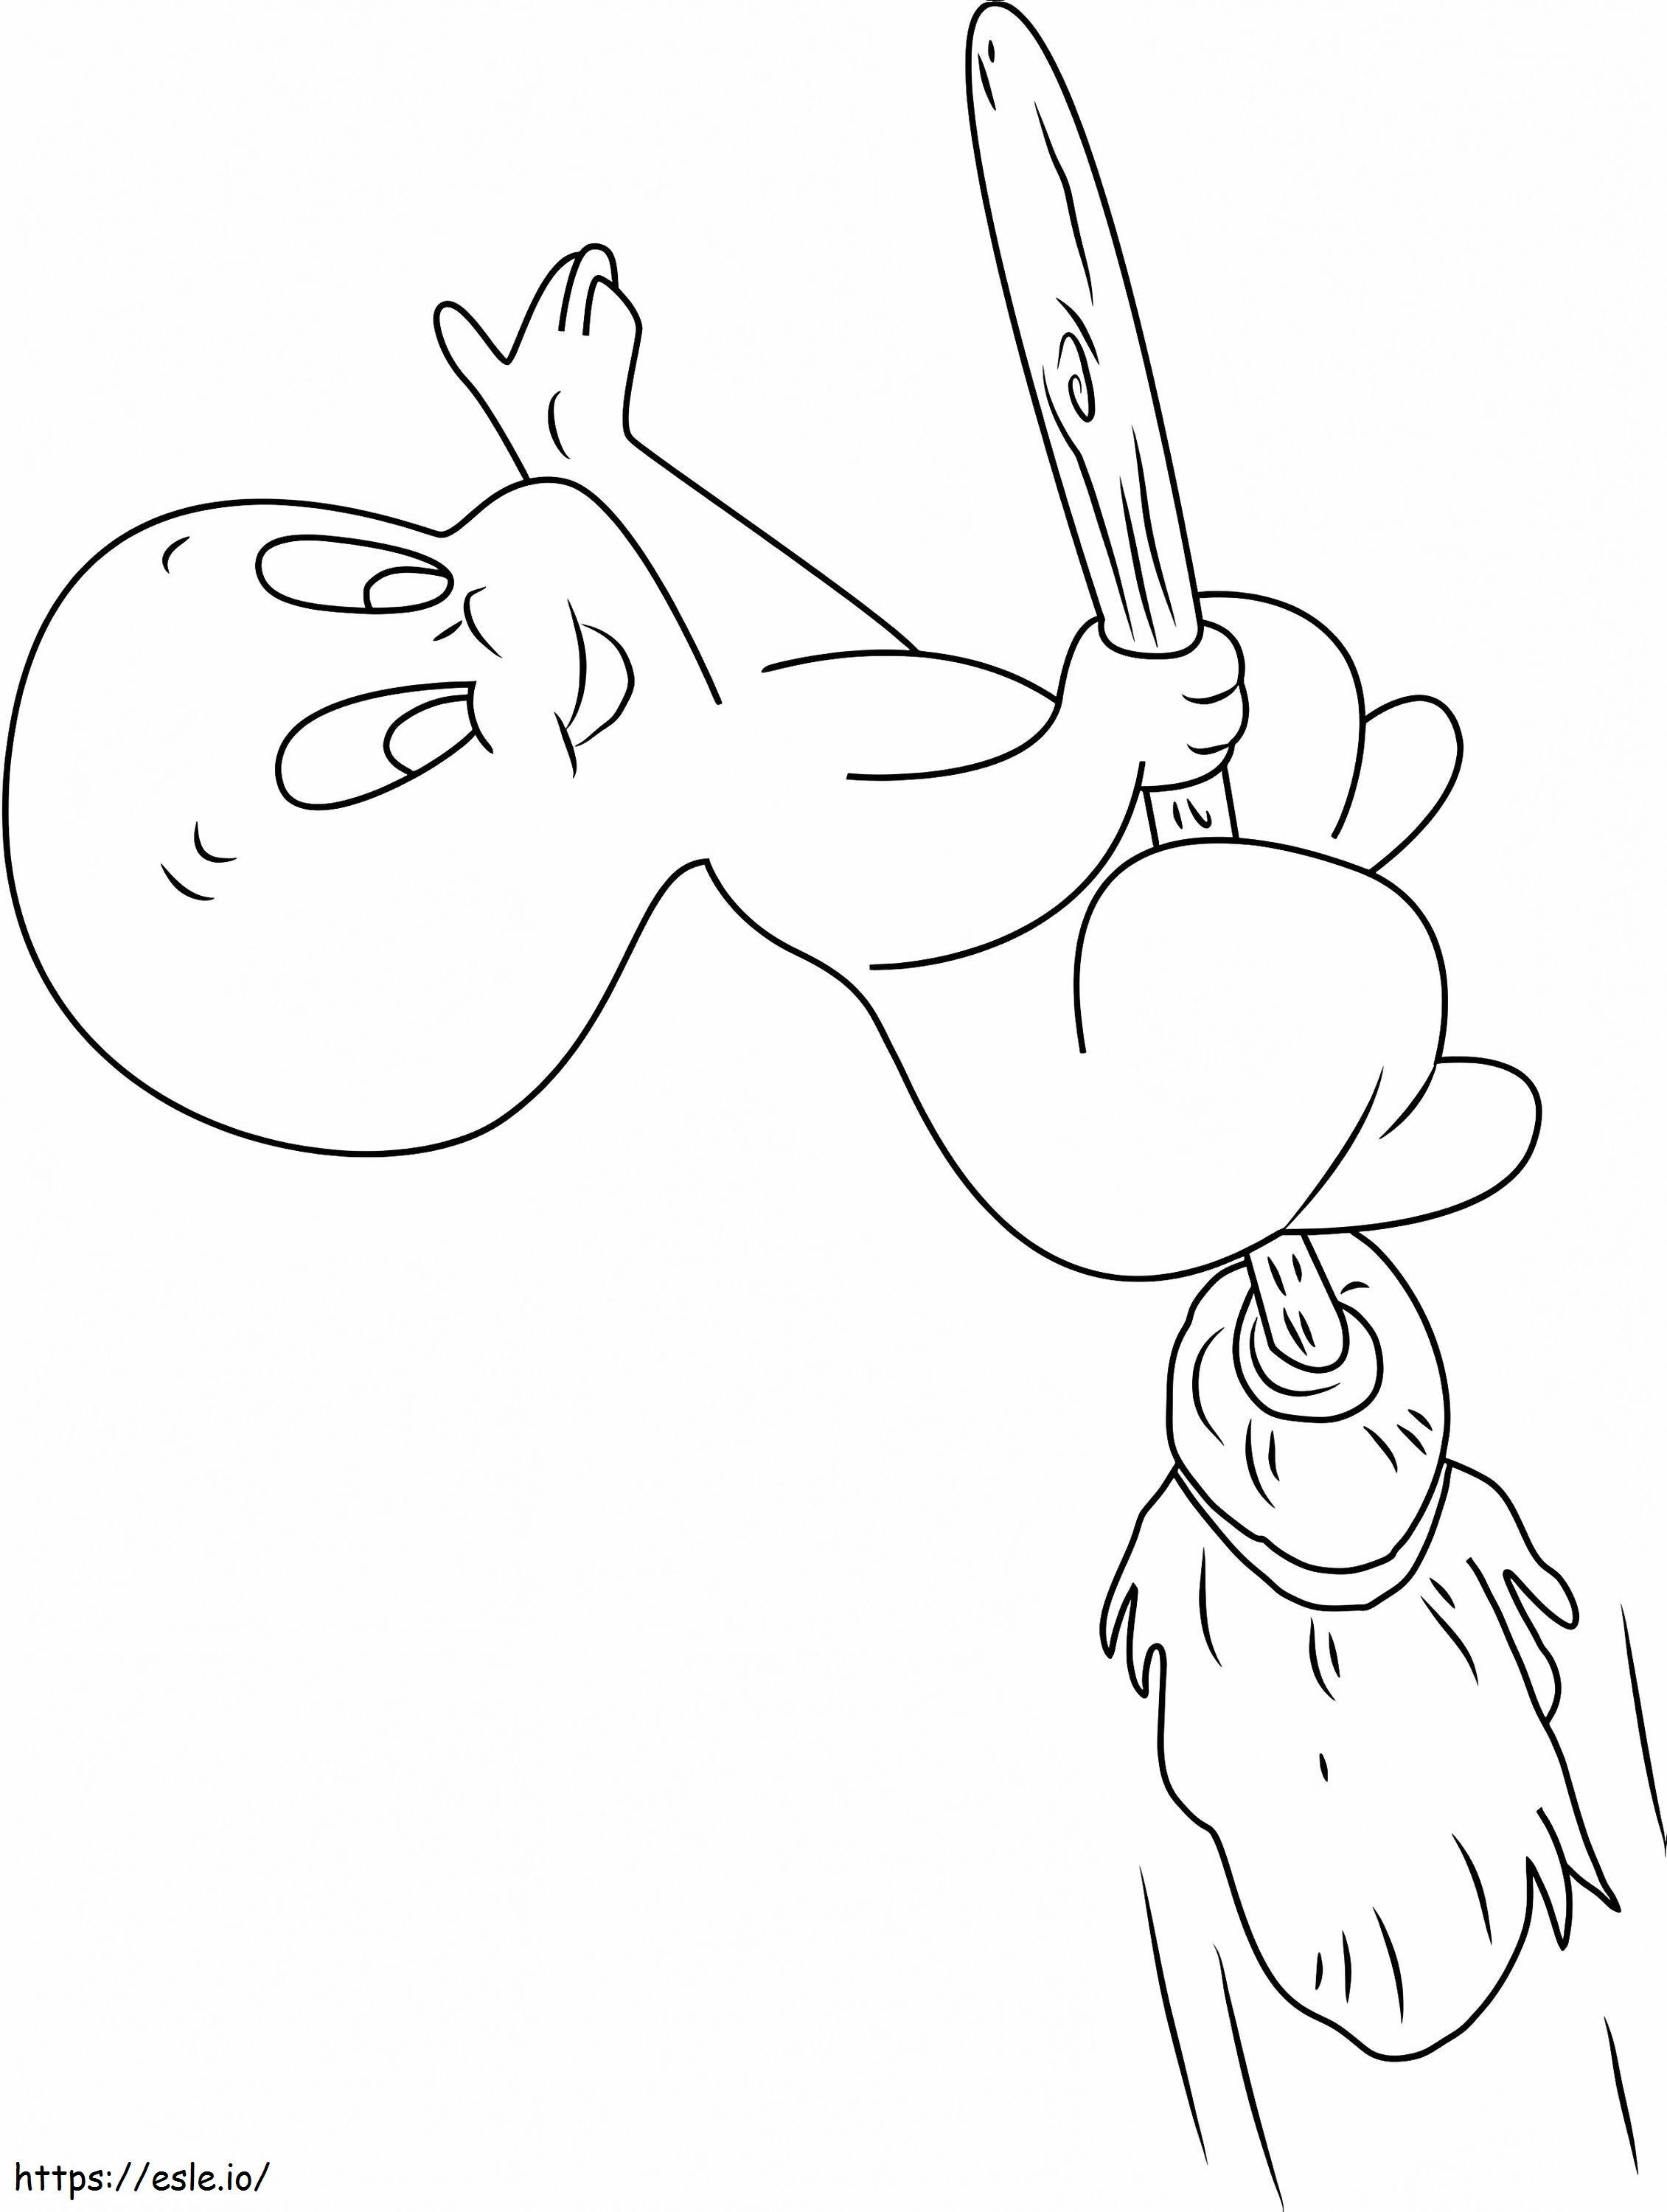 1531536978_Casper Flying On Broomstick A4 coloring page